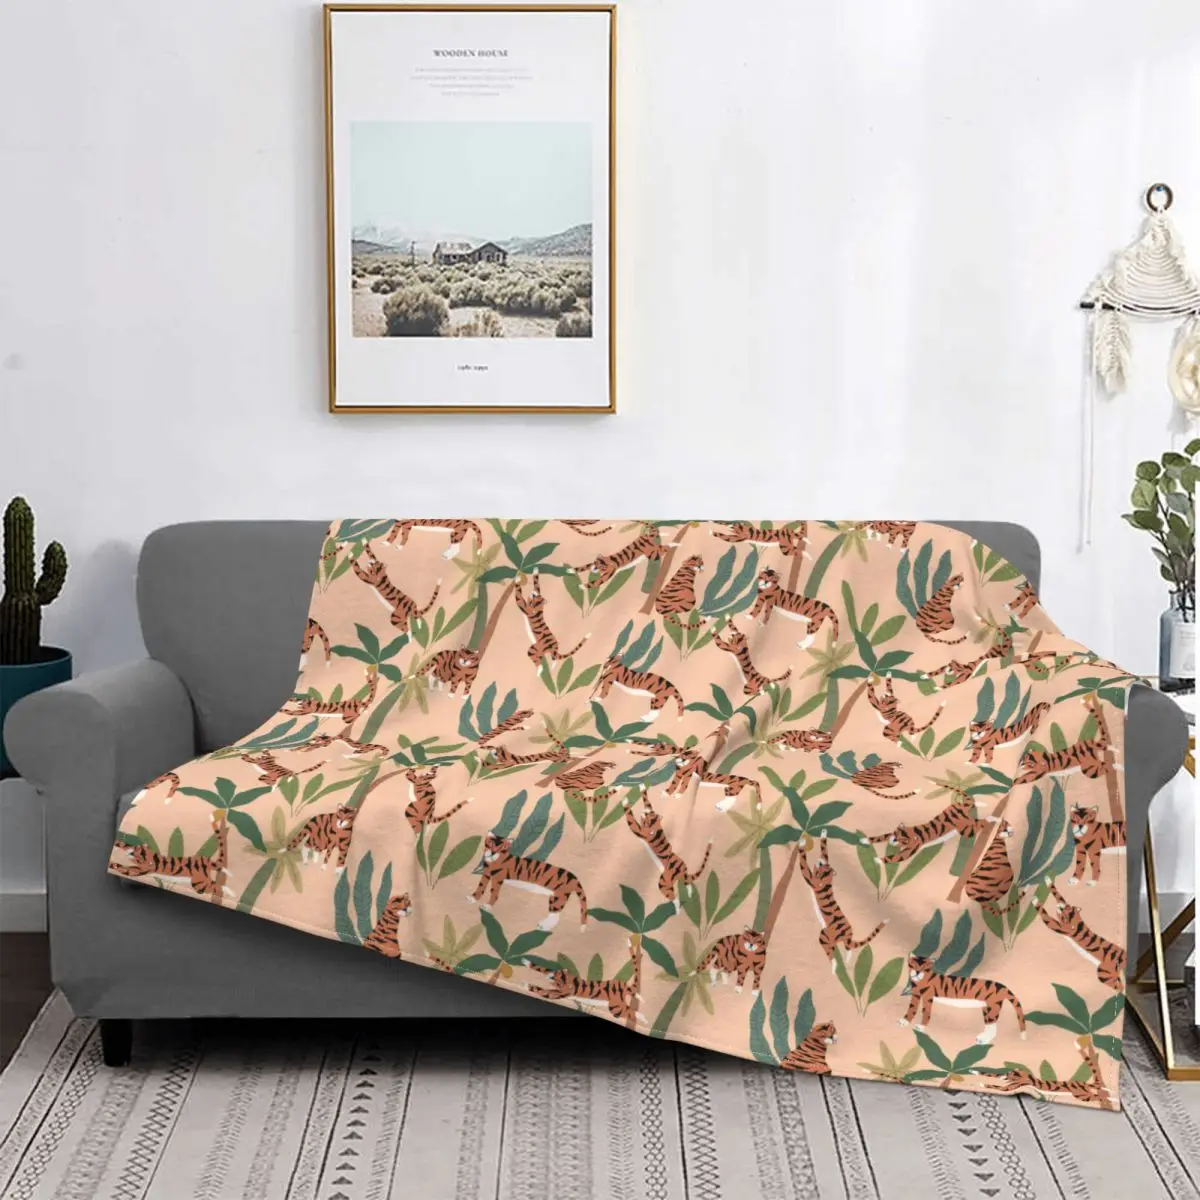 

Summer With Tigers And Palm Trees Blankets Fleece Decoration Ultra-Soft Throw Blankets for Bedding Bedroom Plush Thin Quilt